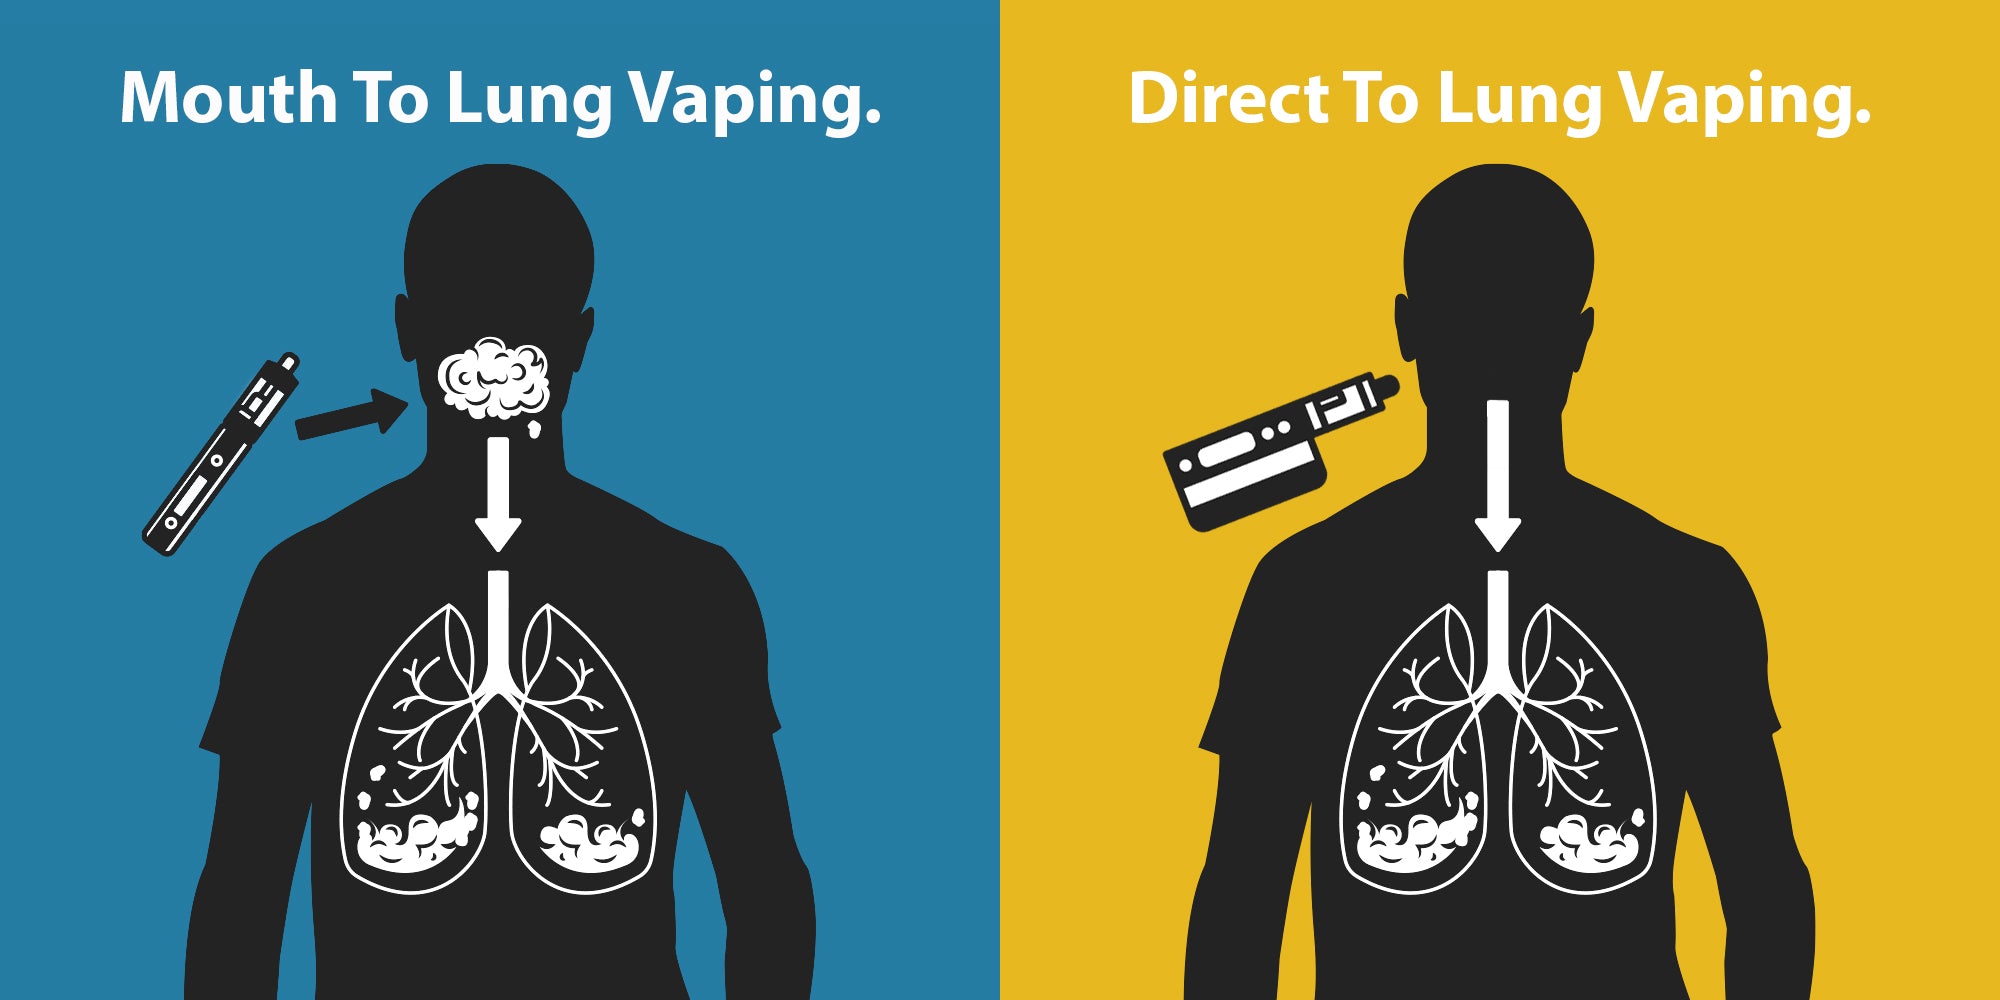 What is Mouth to Lung and Direct to Lung Vaping?